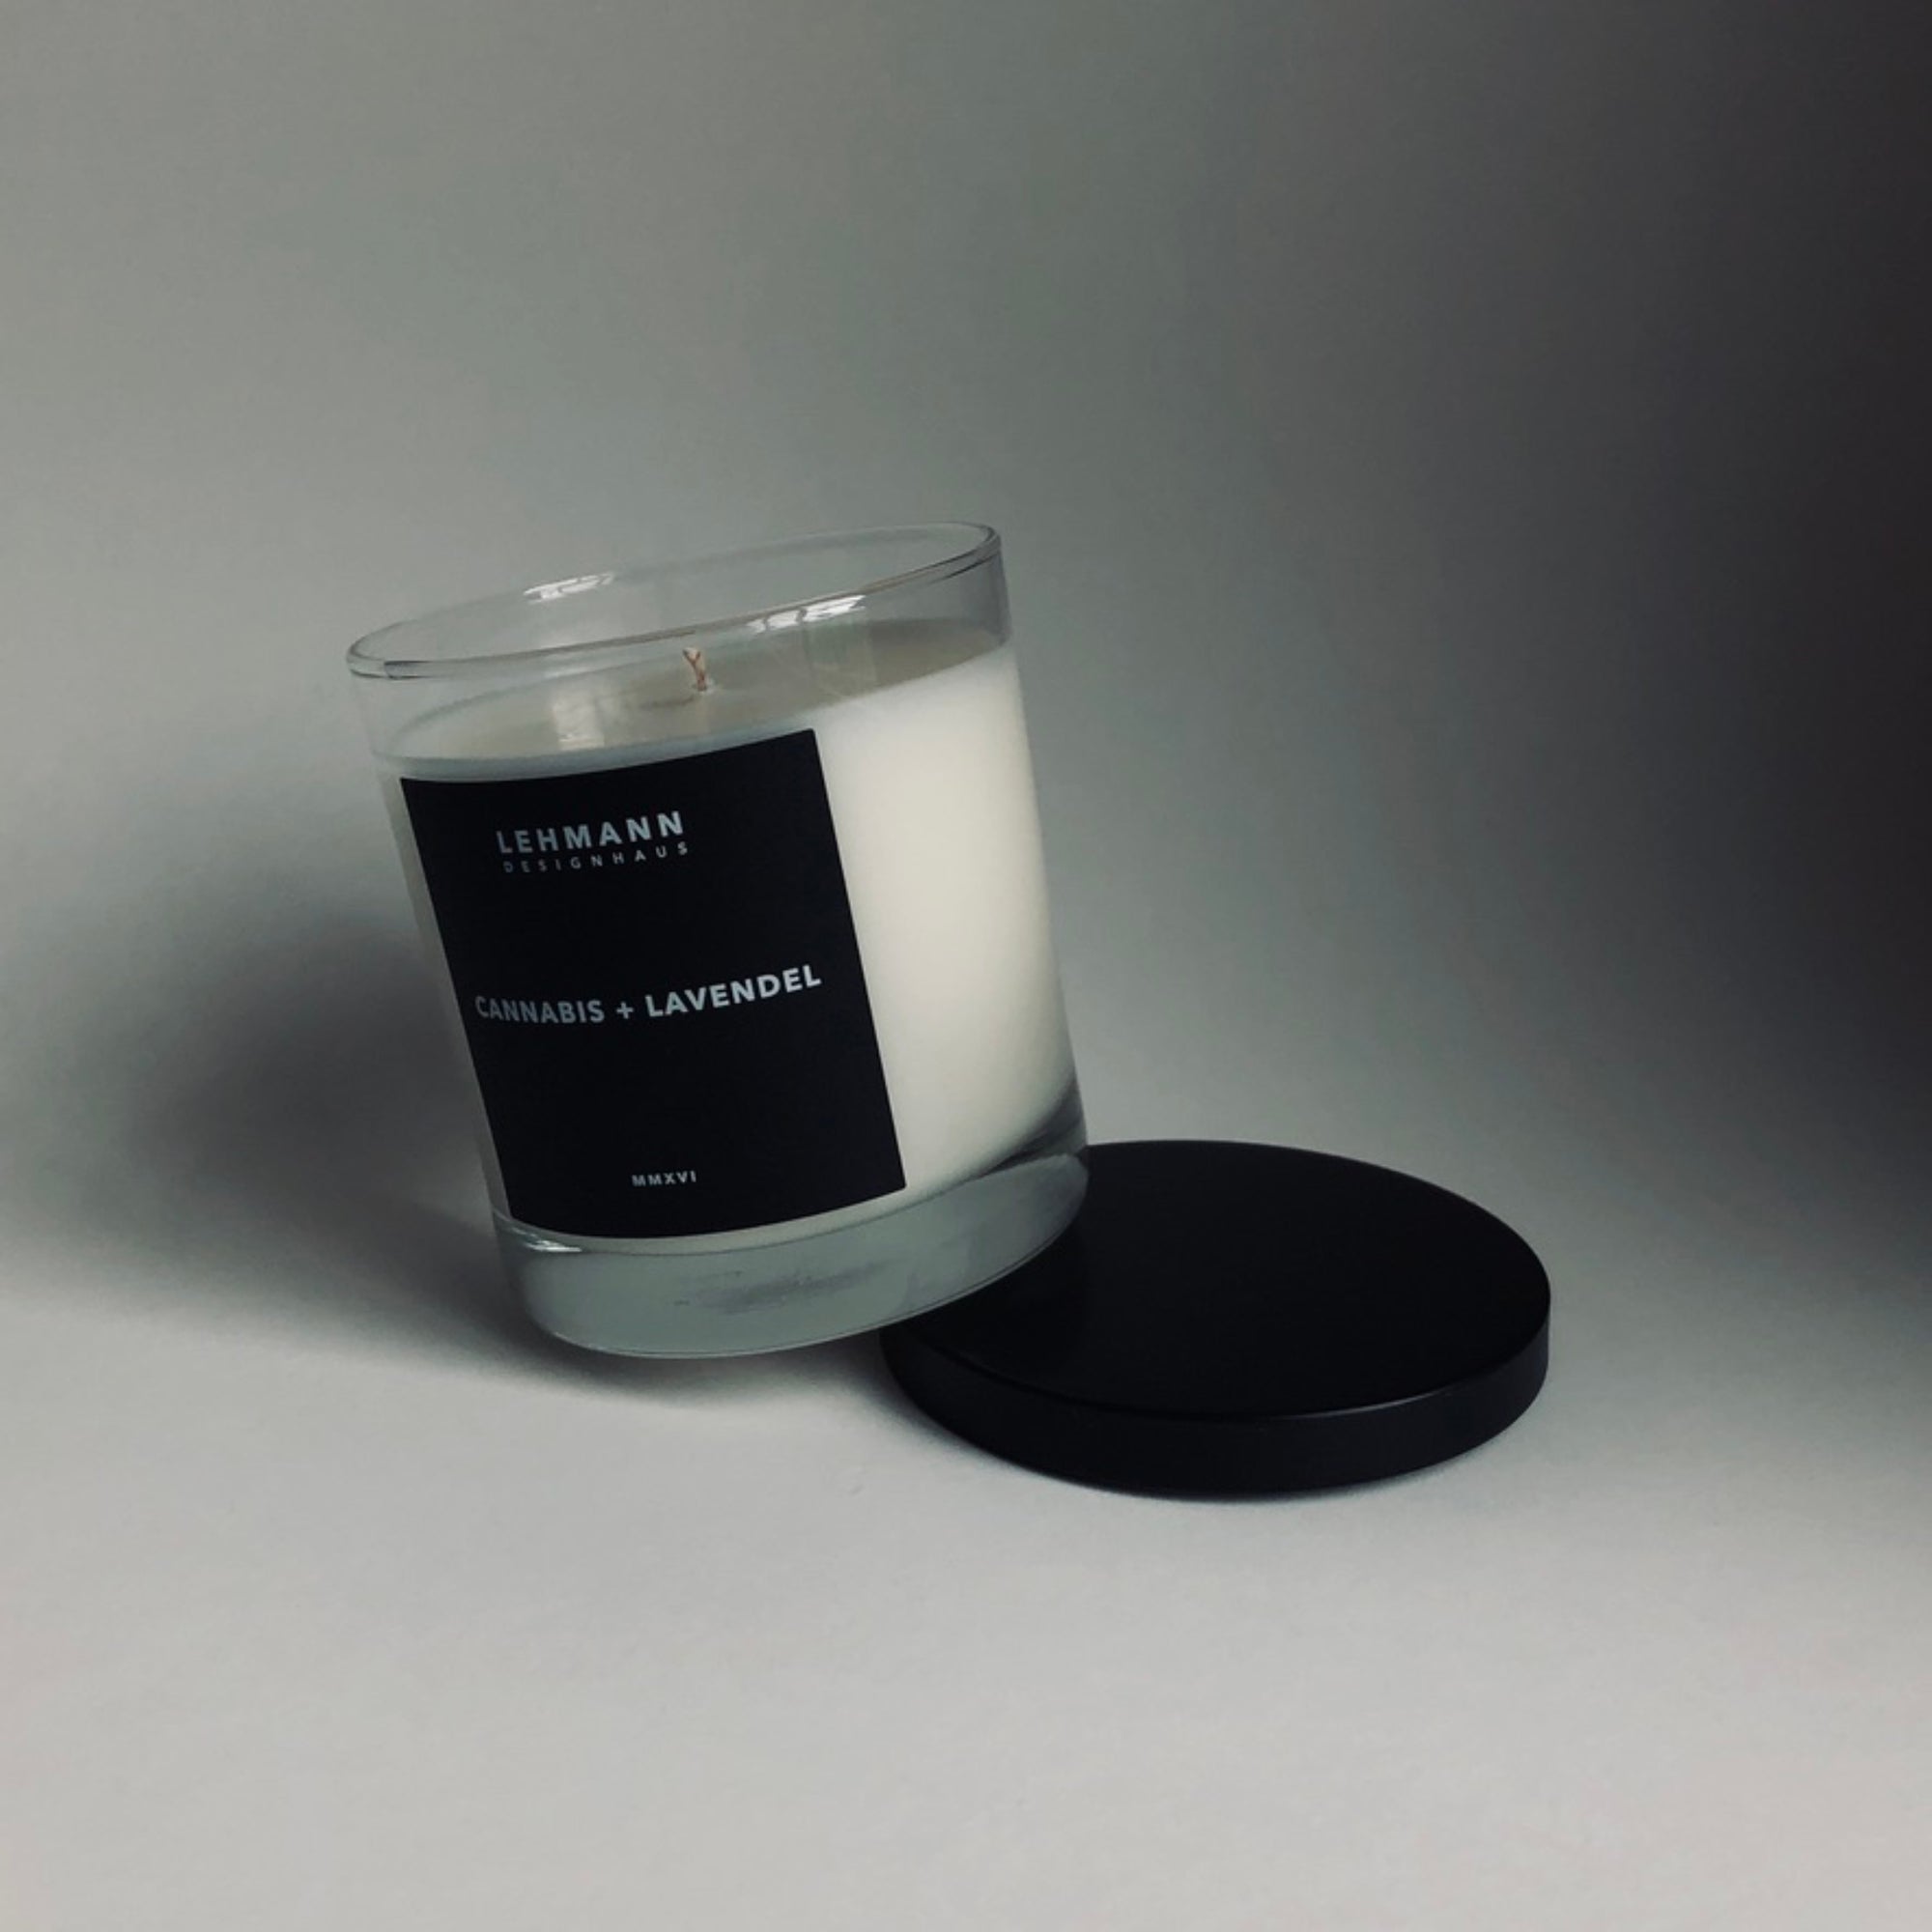 Picture of Cannabis and Lavendel Candle sitting on black lid against white backdrop.